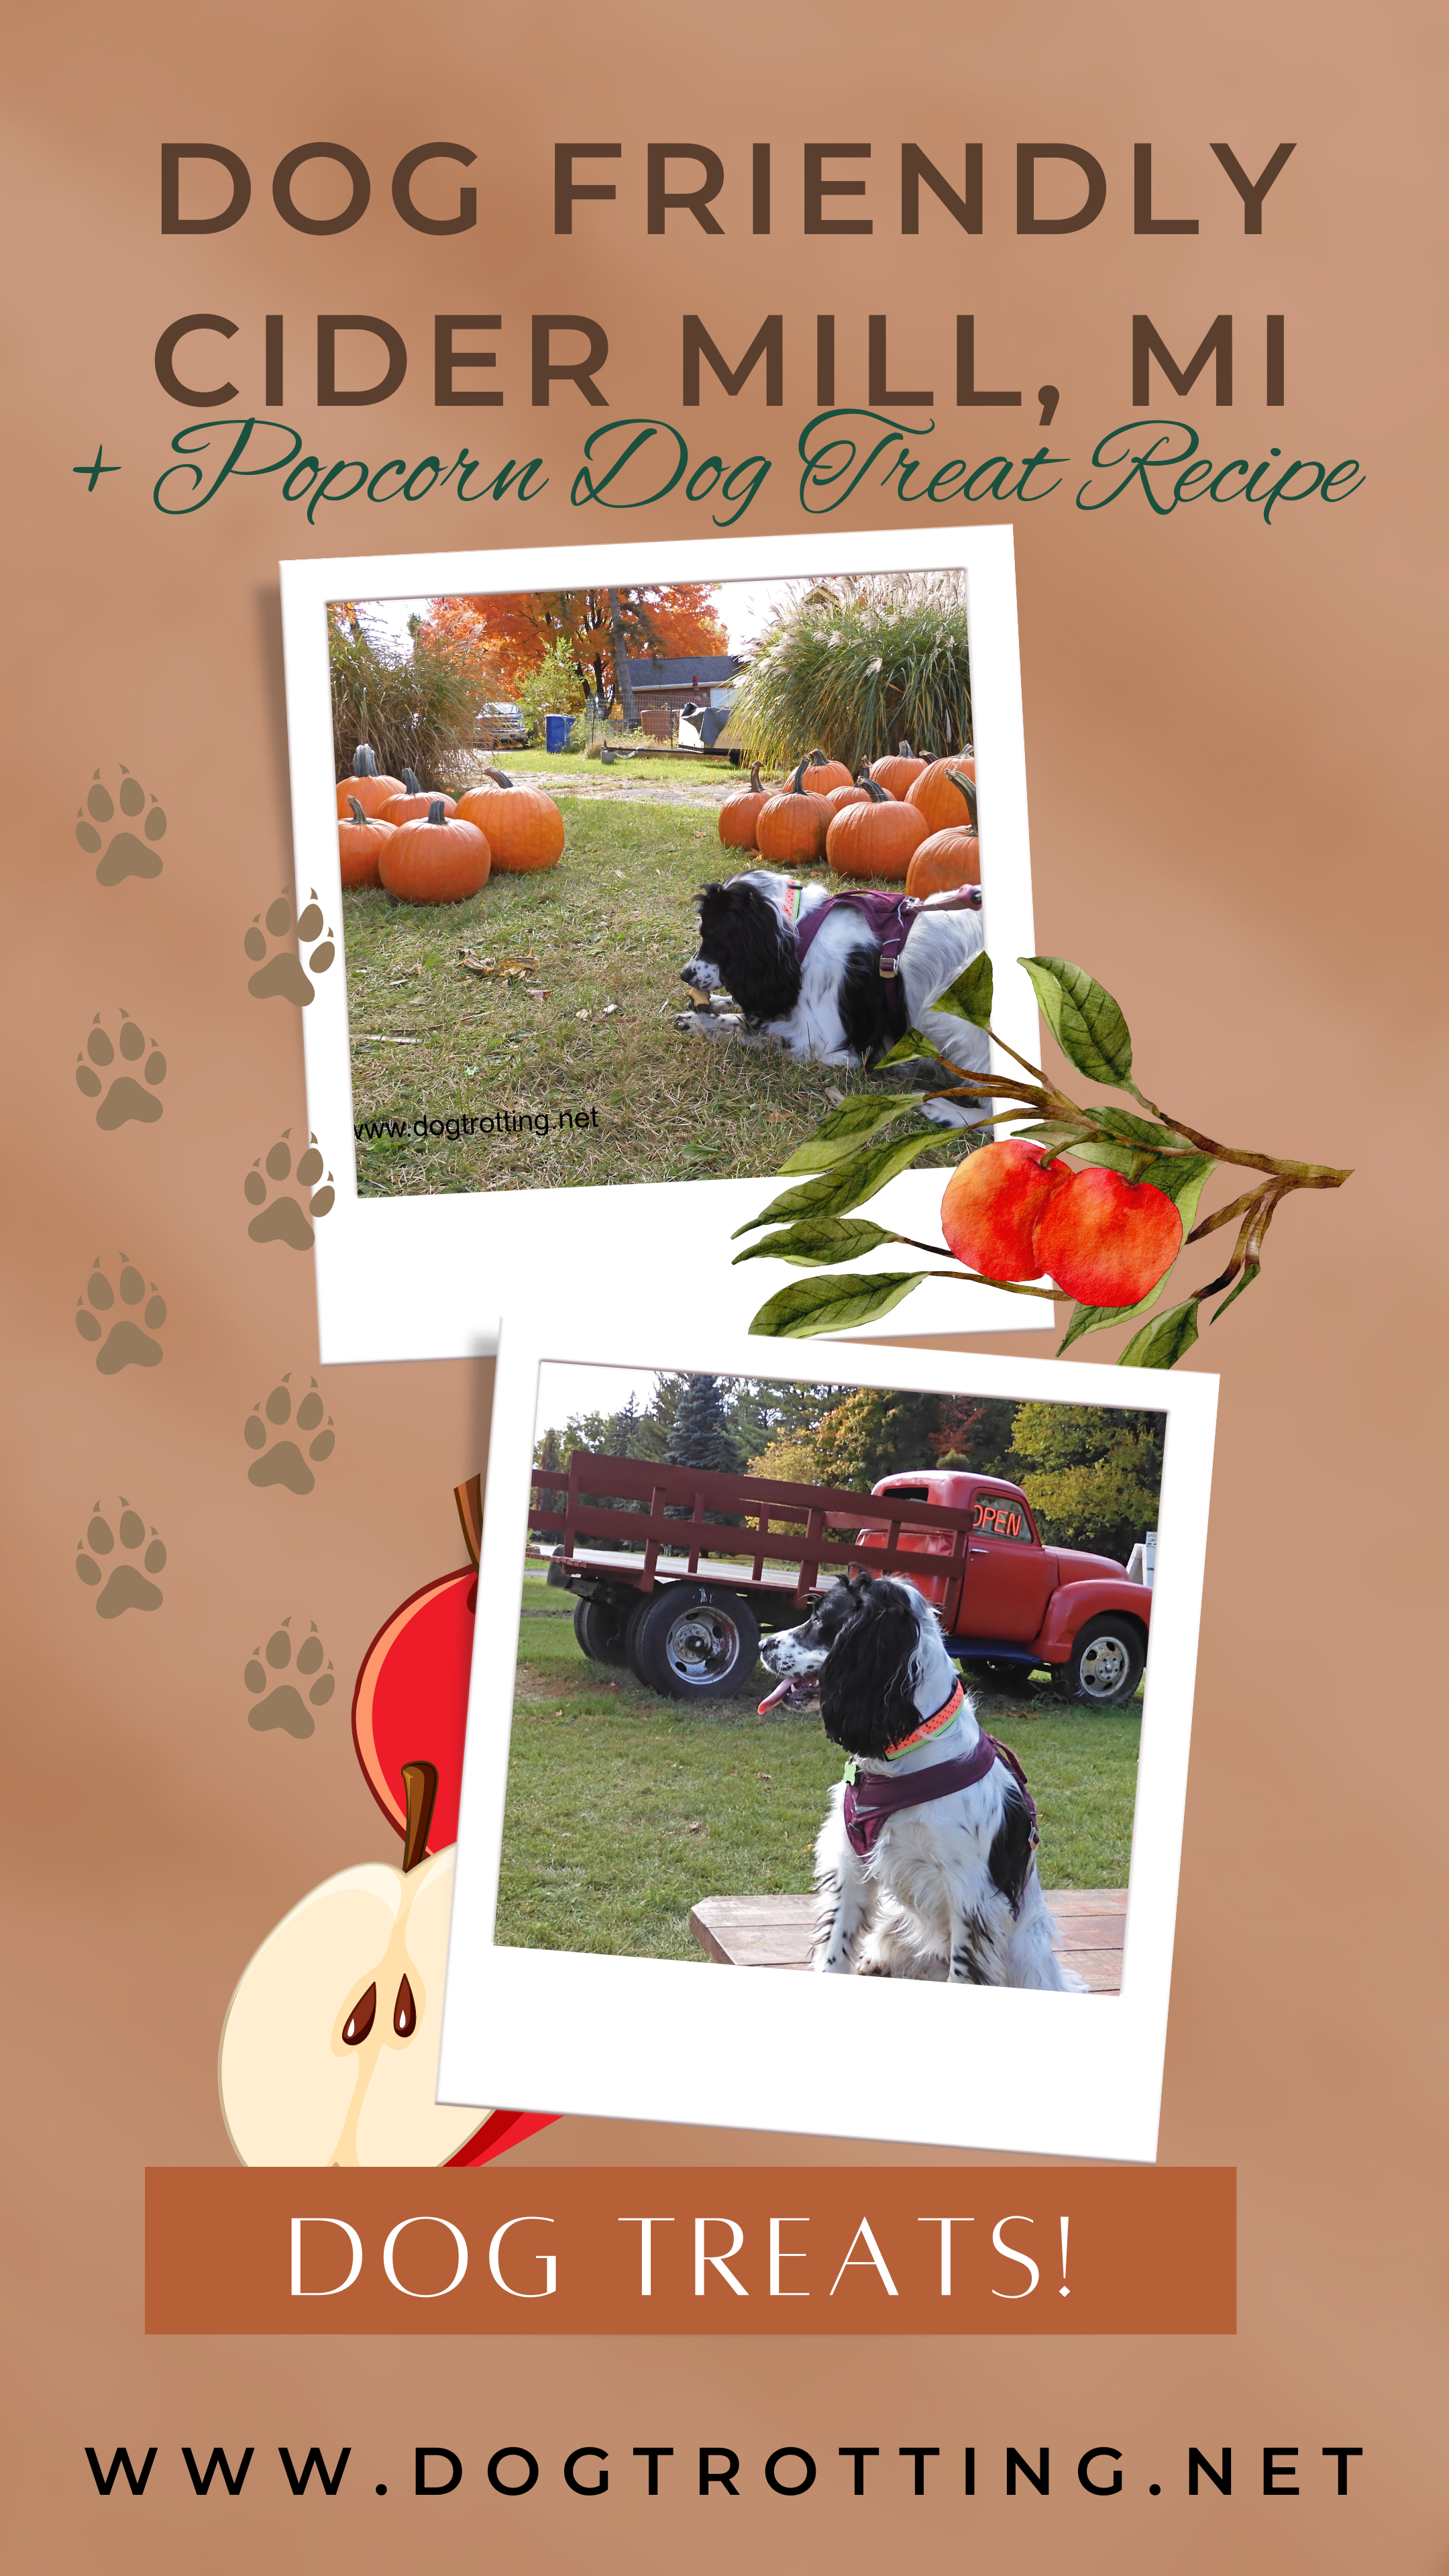 poster with pictures of dog promoting Dog Friendly Cider Mill in Michigan